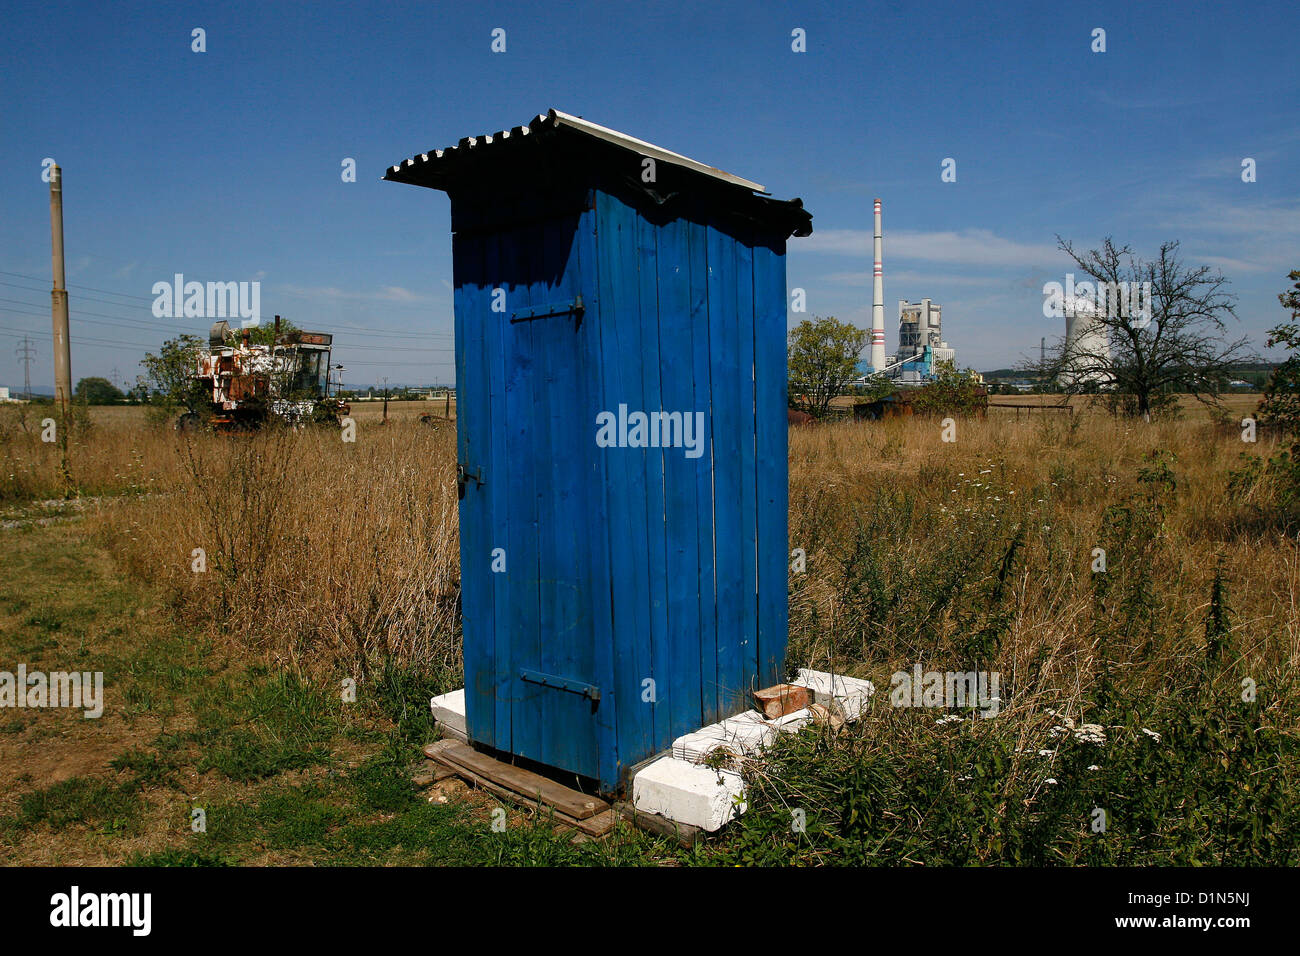 Old Outhouse, Wooden blue toilet house in the landscape Czech Republic Stock Photo